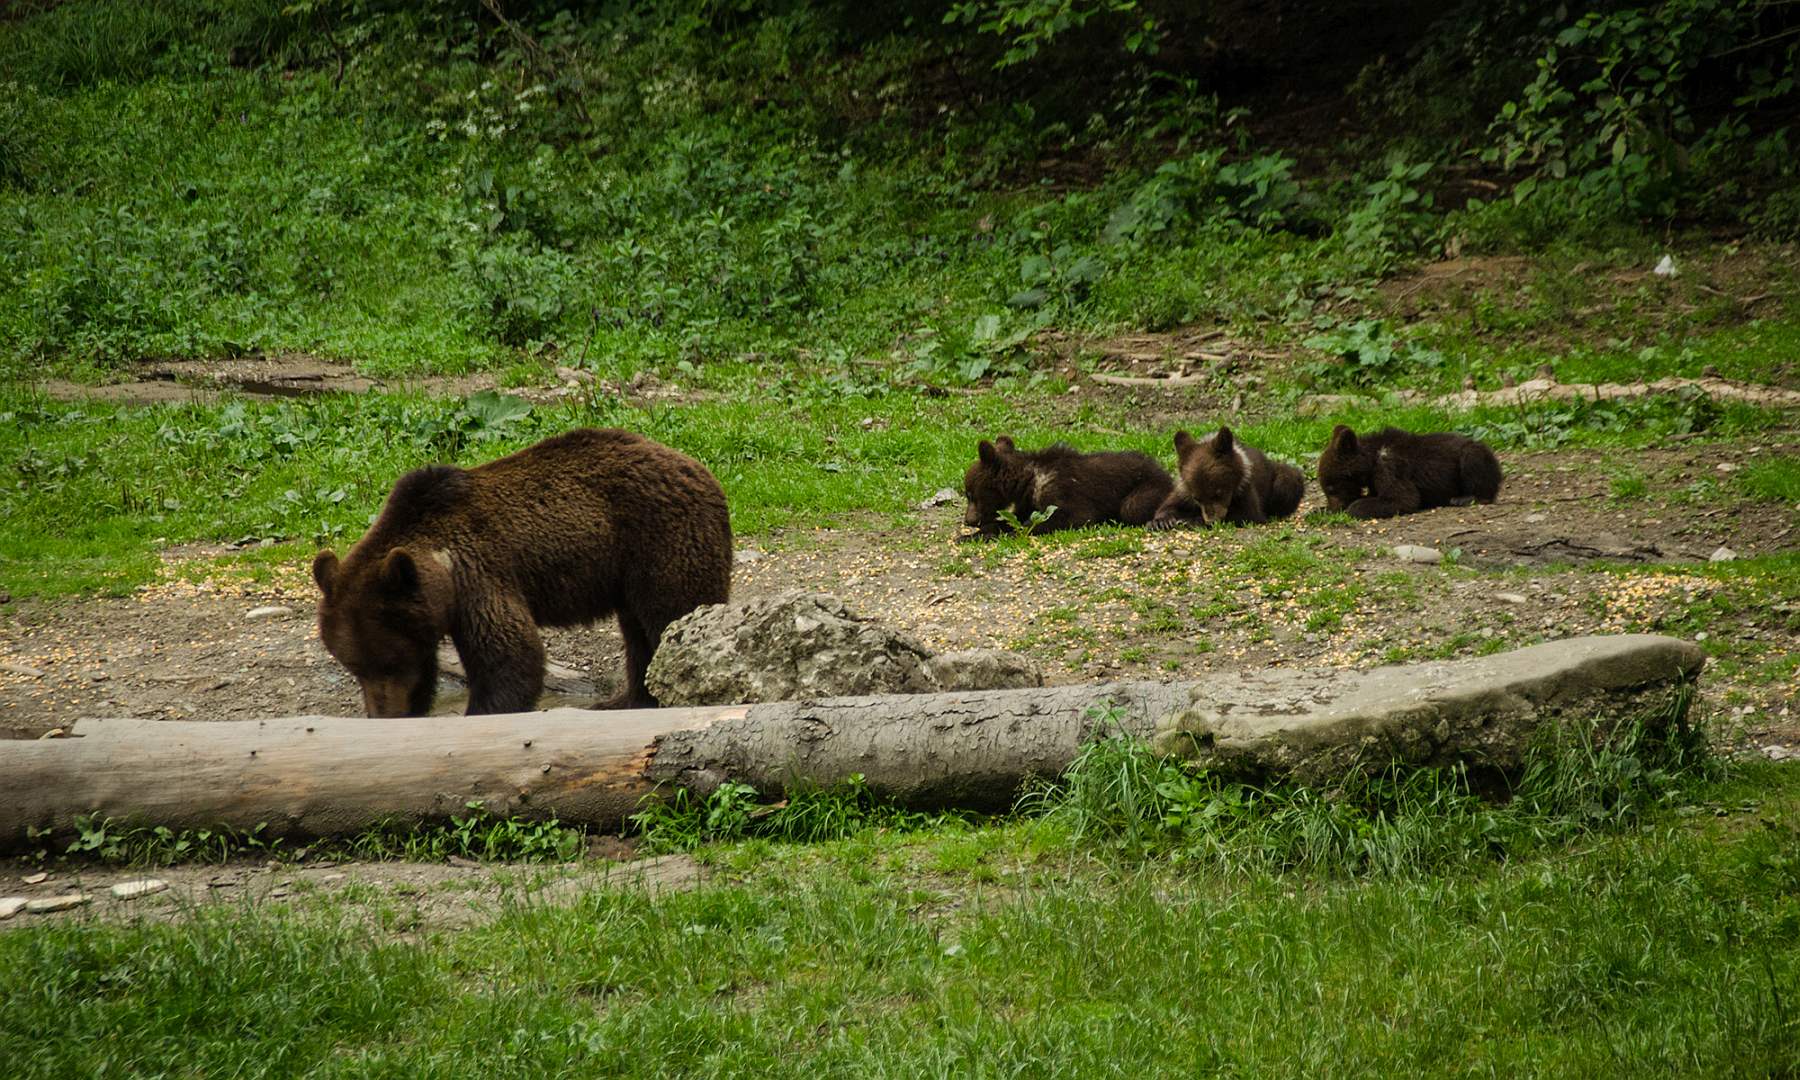 Mother brown bear with three bear cubs